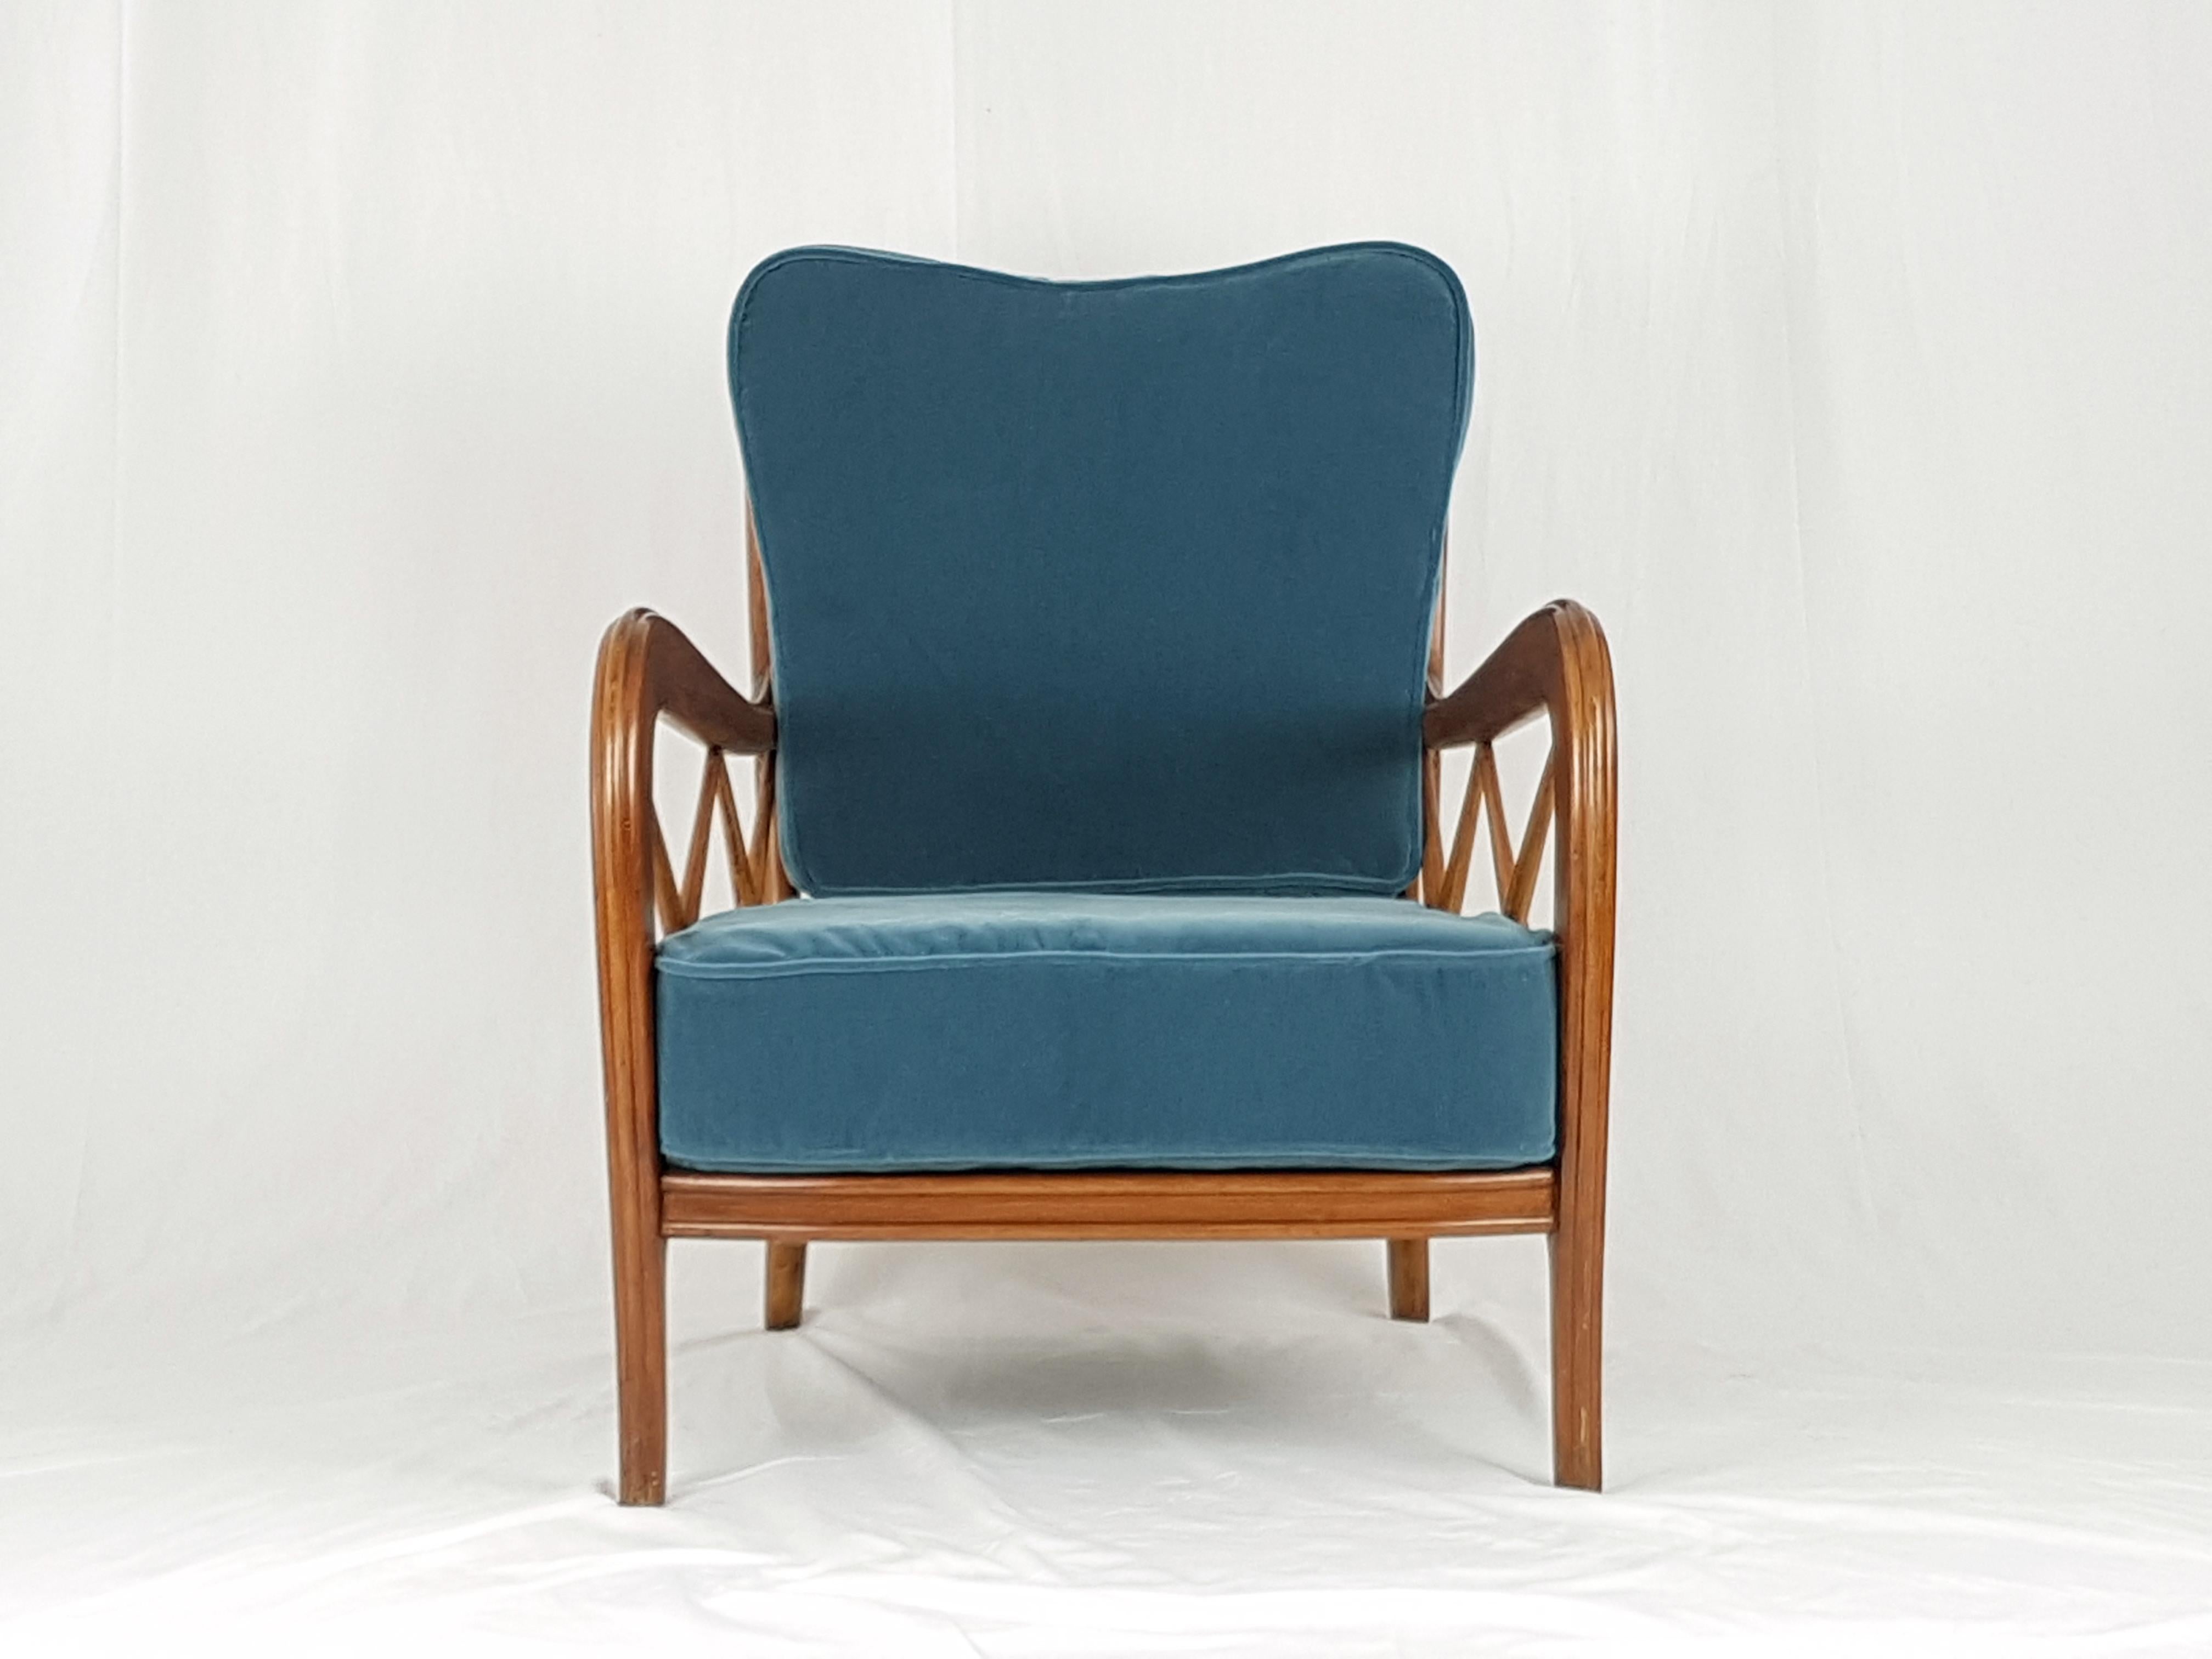 This beautiful armchair was produced in Italy around the 1940s. It is attributed to the famous italian architect and designer Paolo Buffa.
The armchair is made from a wooden structure with a wire mesh with two elegant mid blue velvet cushions. The